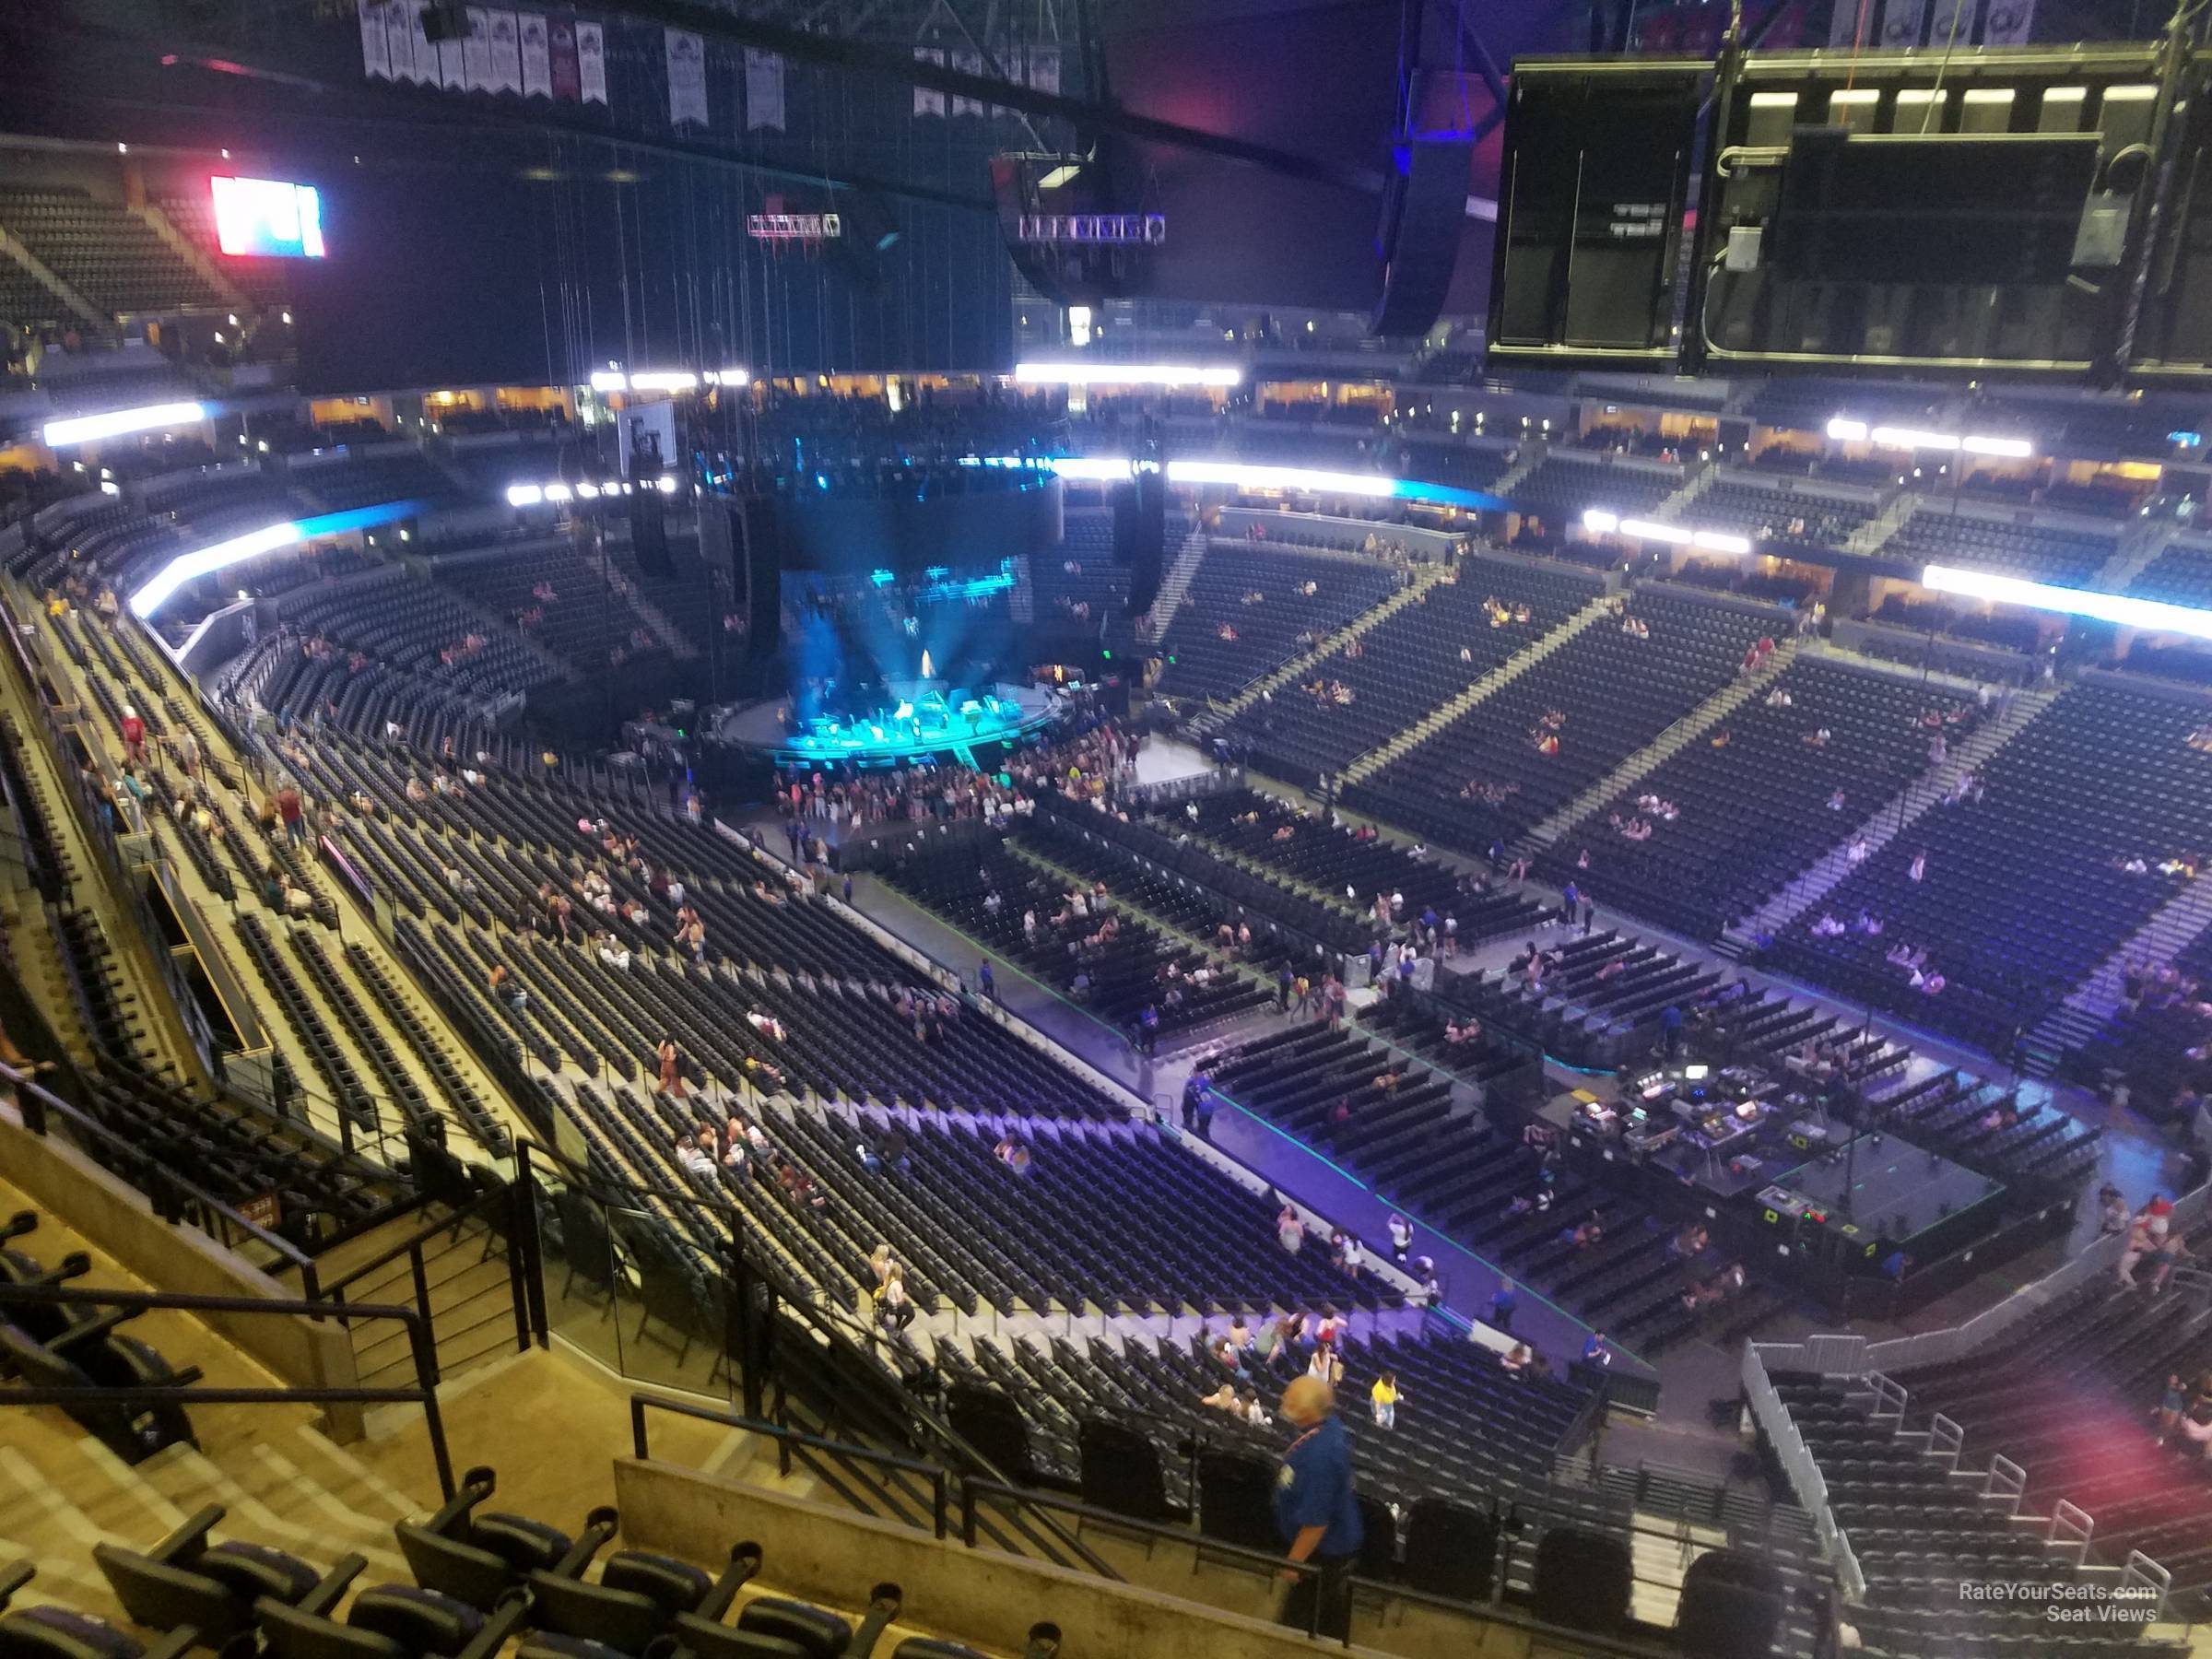 section 332, row 13 seat view  for concert - ball arena